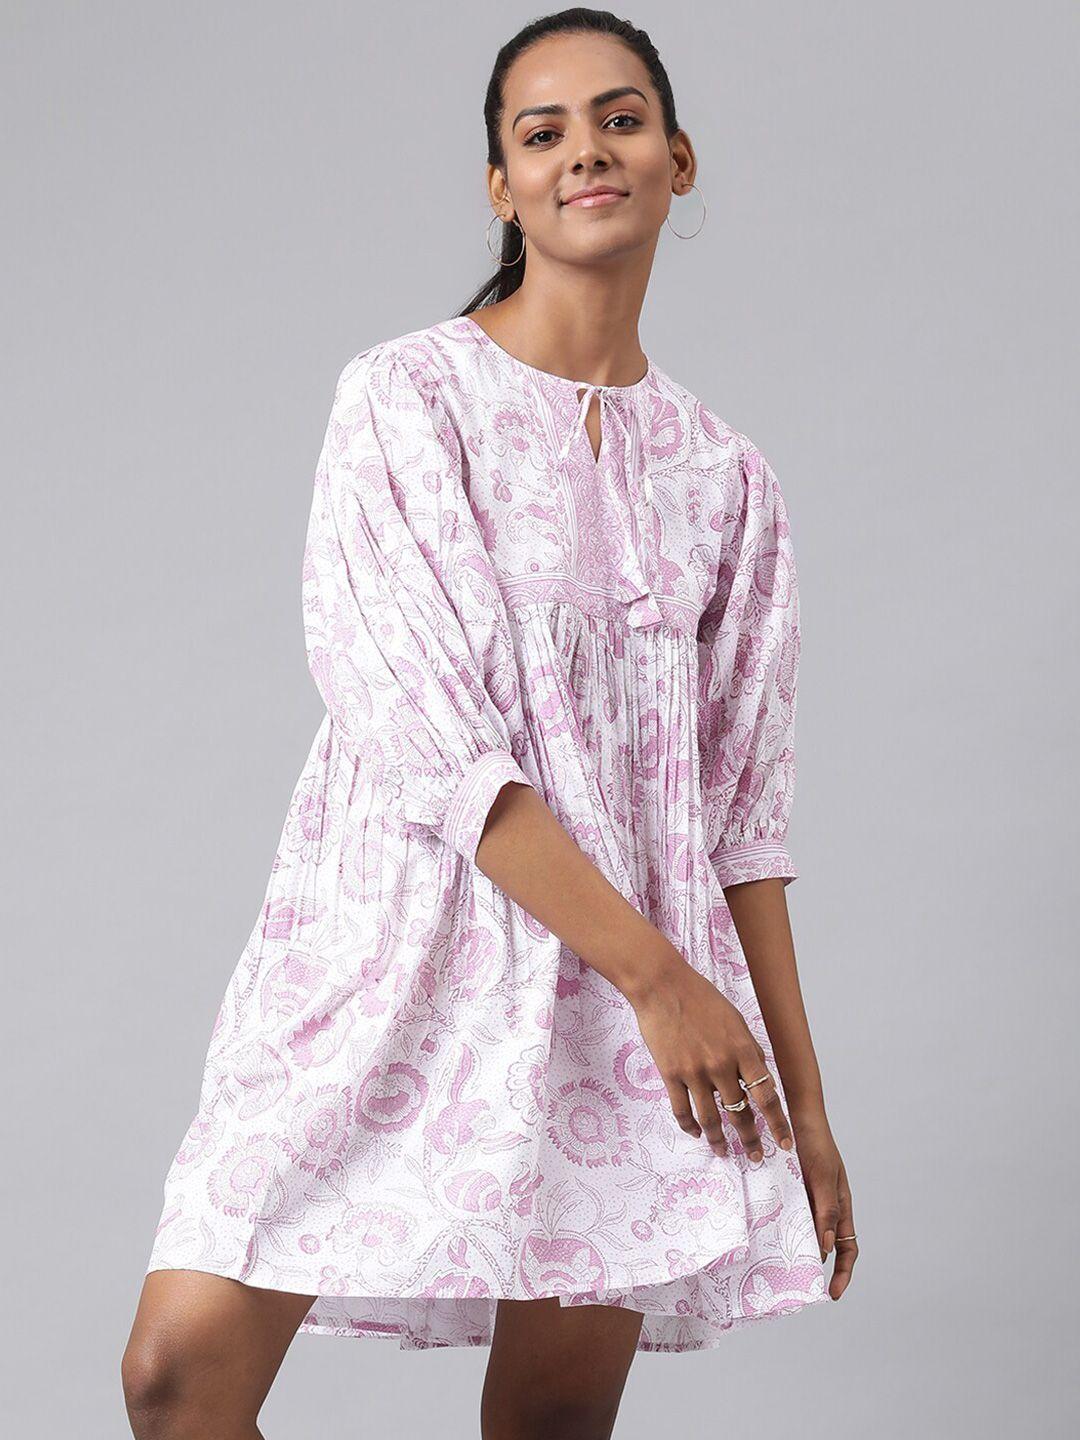 Fabindia White Floral Tie-Up Neck A-Line Dress